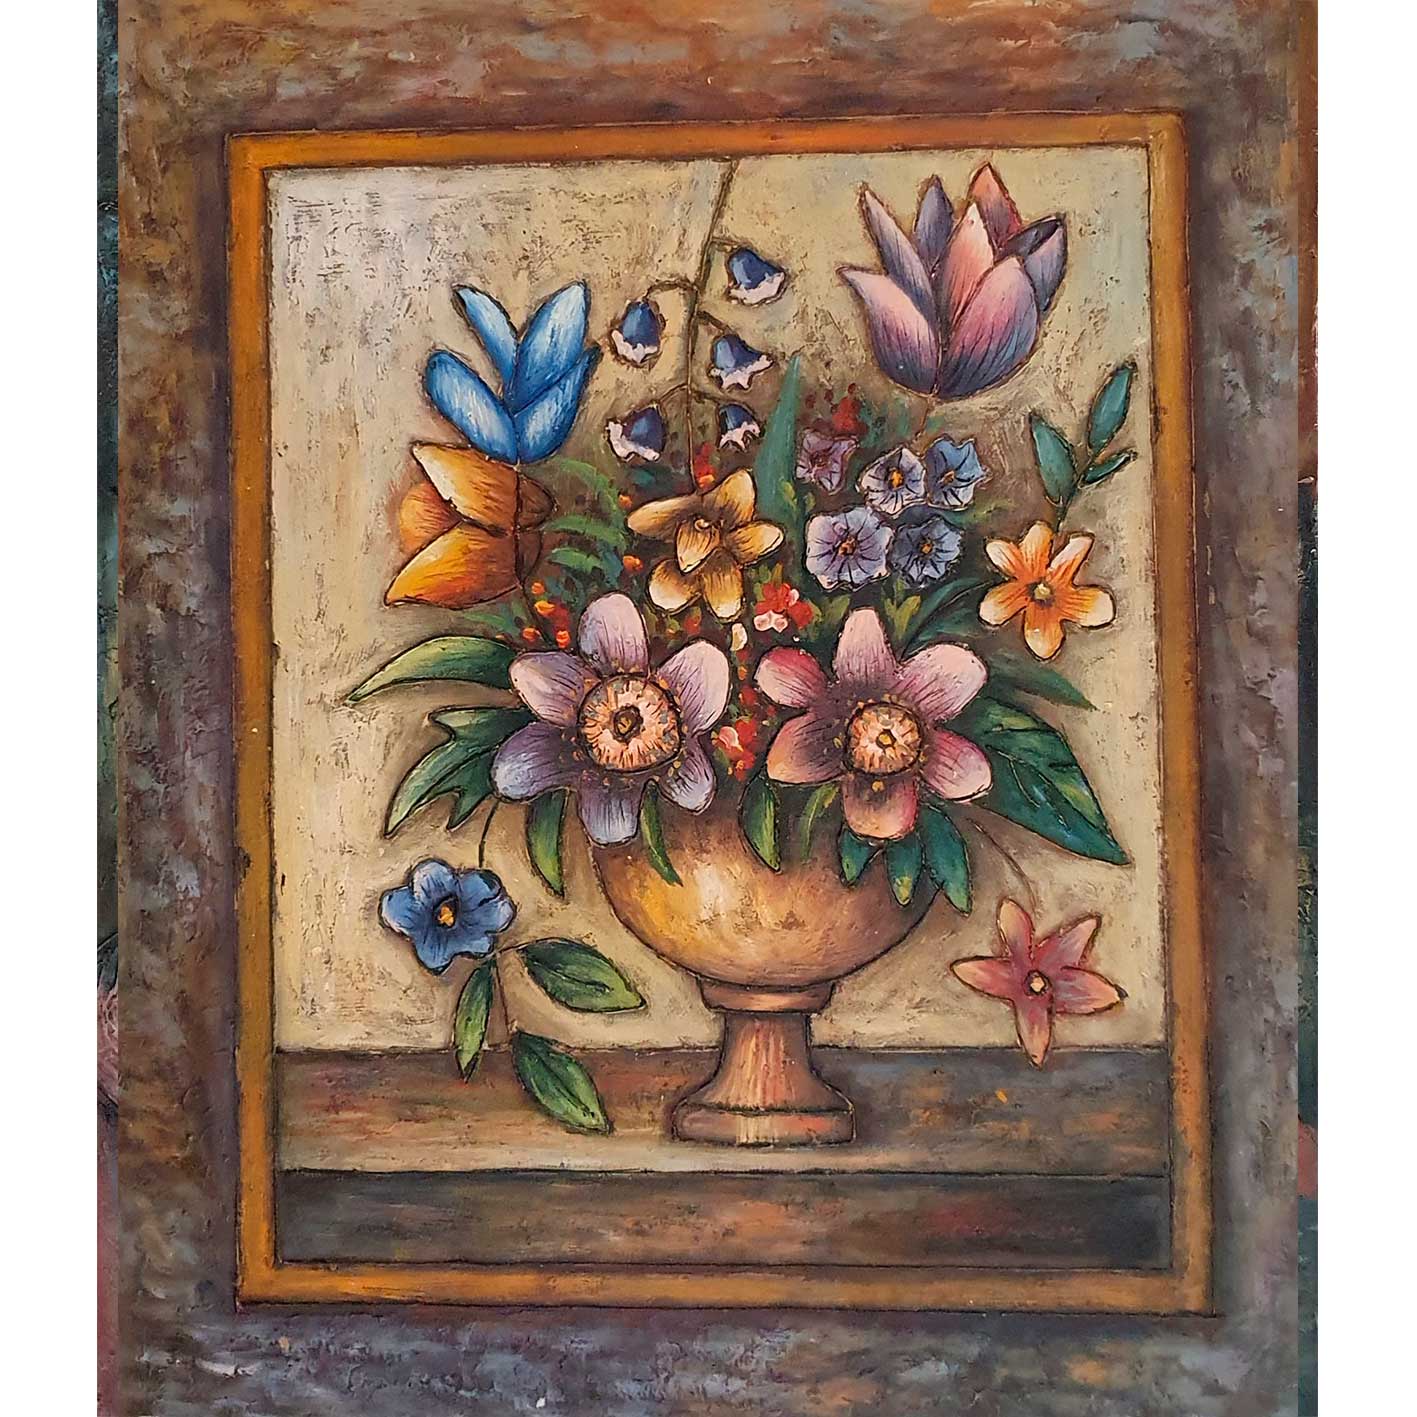 Star Still Life Diptych Painting 50x60 cm [2 pieces]